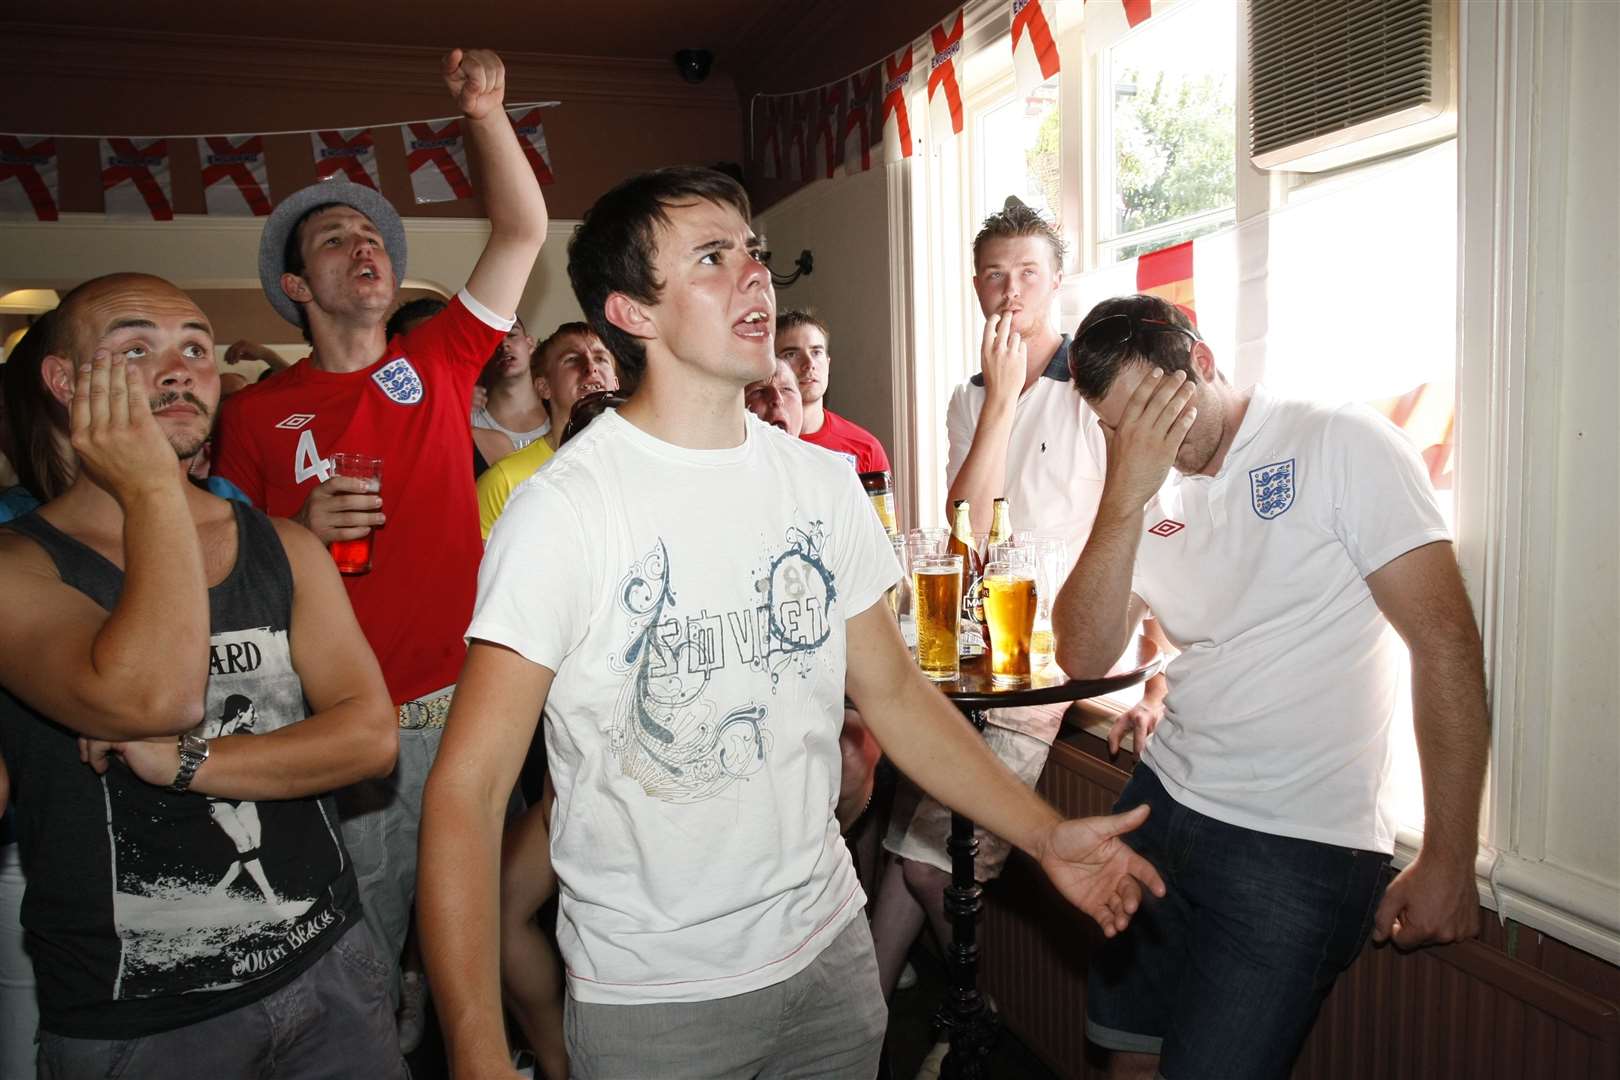 It all starts to go wrong for fans watching the Germany game at The White Hart pub in Cuxton